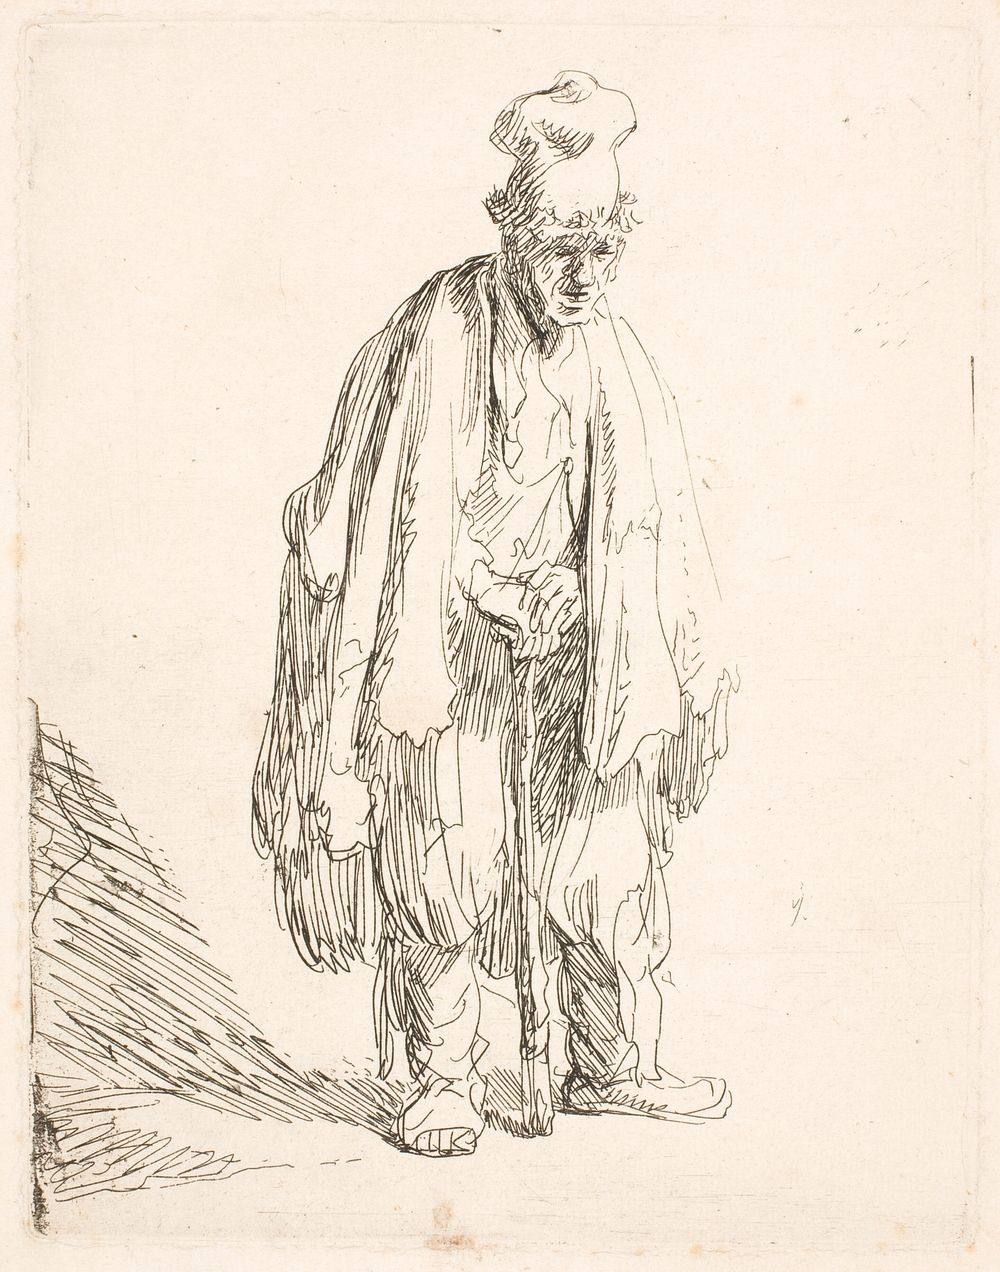 Beggar with tall hat, hands on a cane by Rembrandt van Rijn